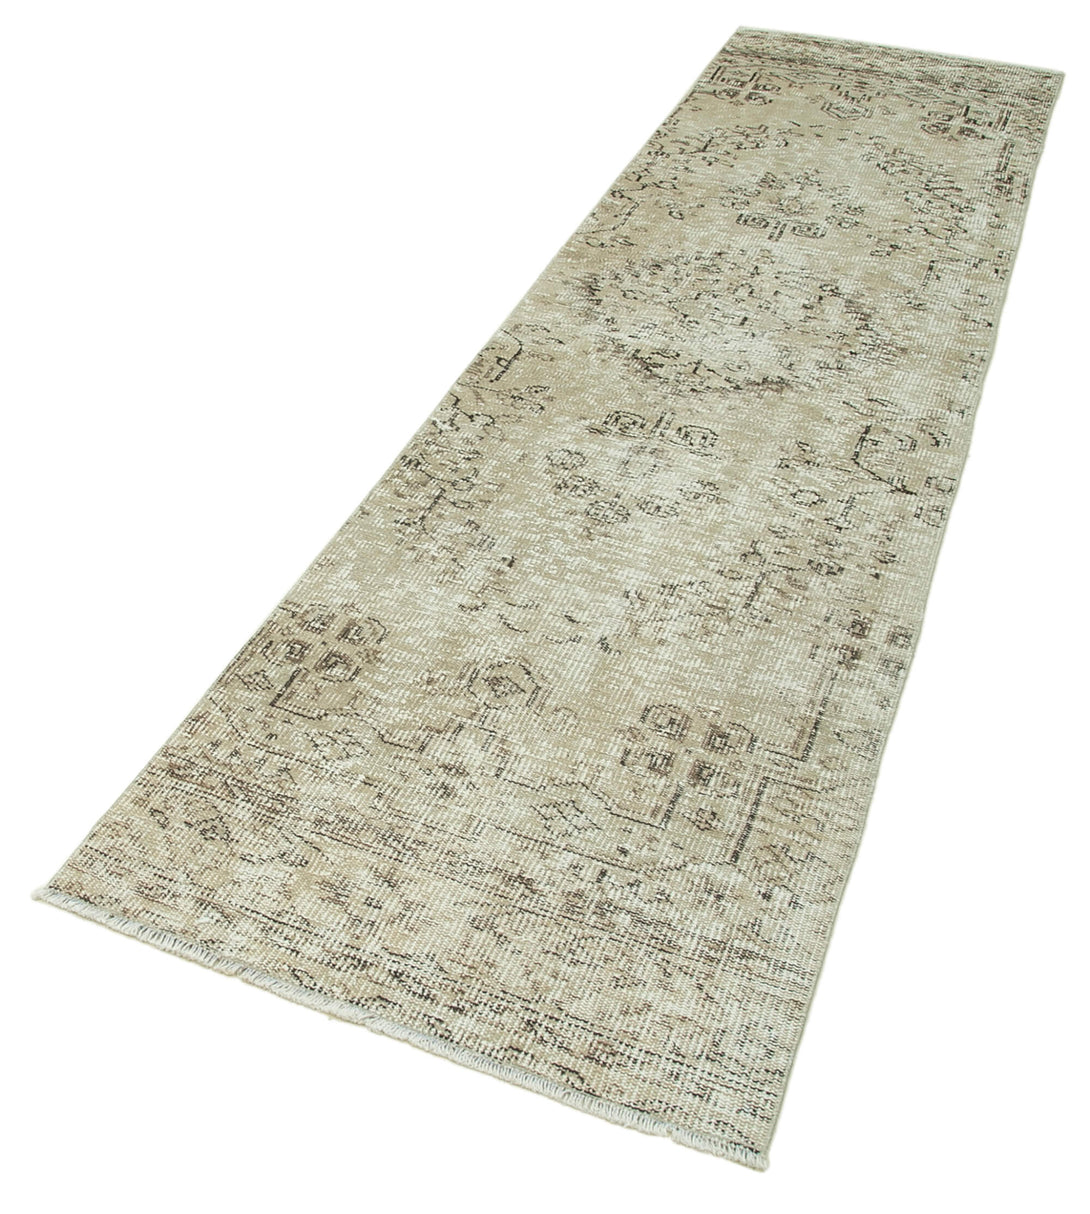 Handmade Overdyed Runner > Design# OL-AC-37061 > Size: 2'-7" x 10'-4", Carpet Culture Rugs, Handmade Rugs, NYC Rugs, New Rugs, Shop Rugs, Rug Store, Outlet Rugs, SoHo Rugs, Rugs in USA